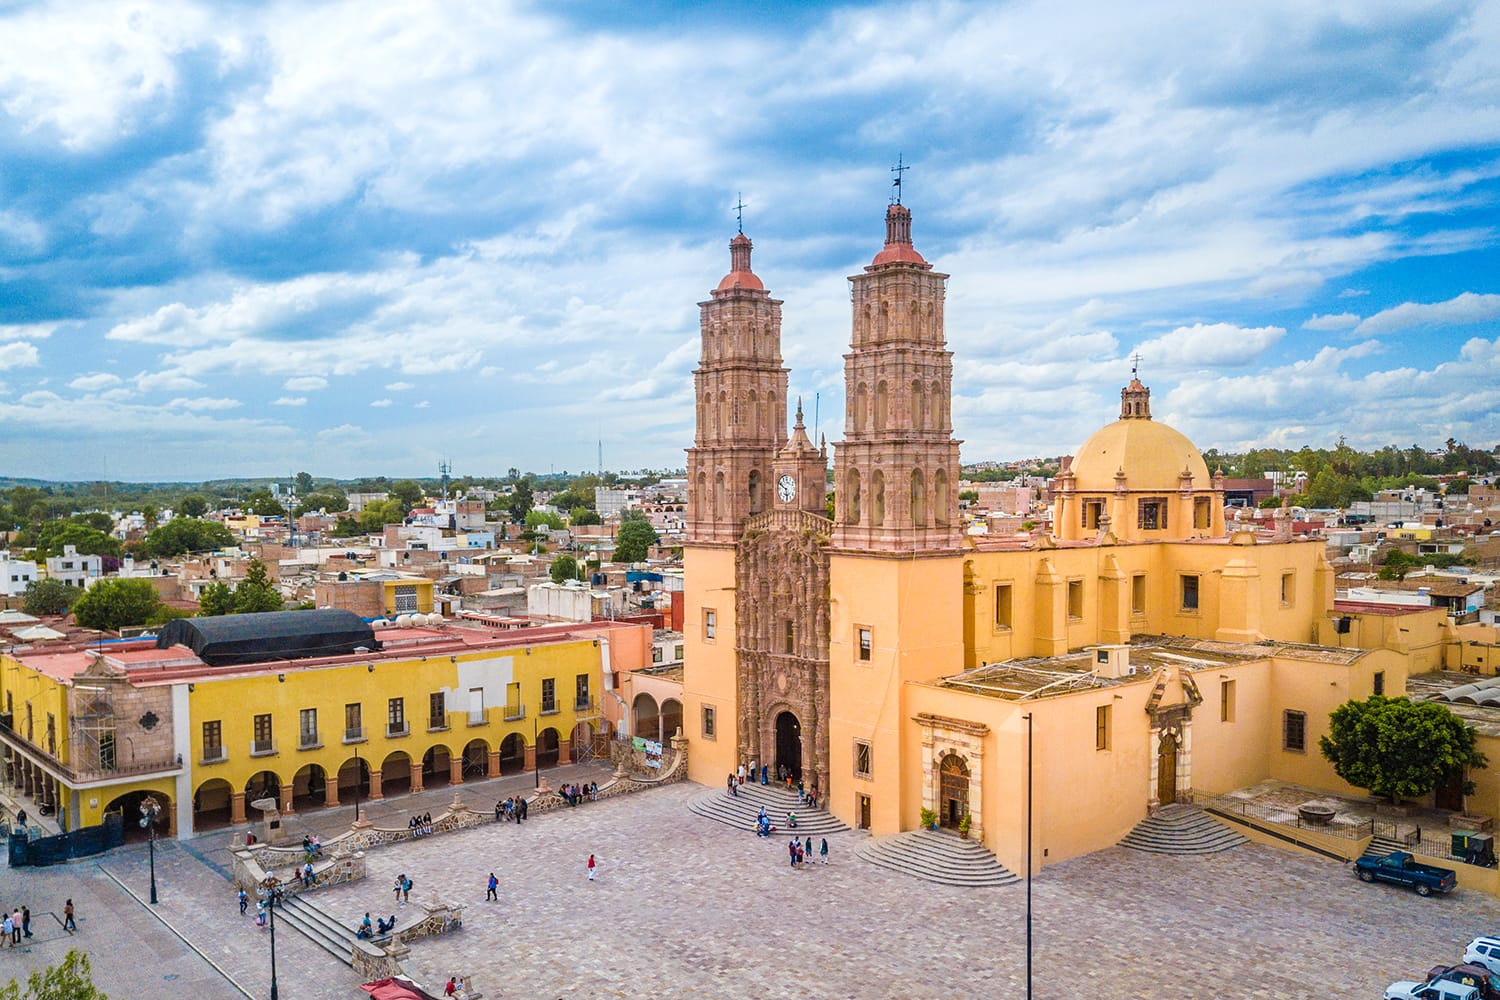 Beautiful aerial view of the main square and the church of Dolores Hidalgo in Guanajuato, Mexico